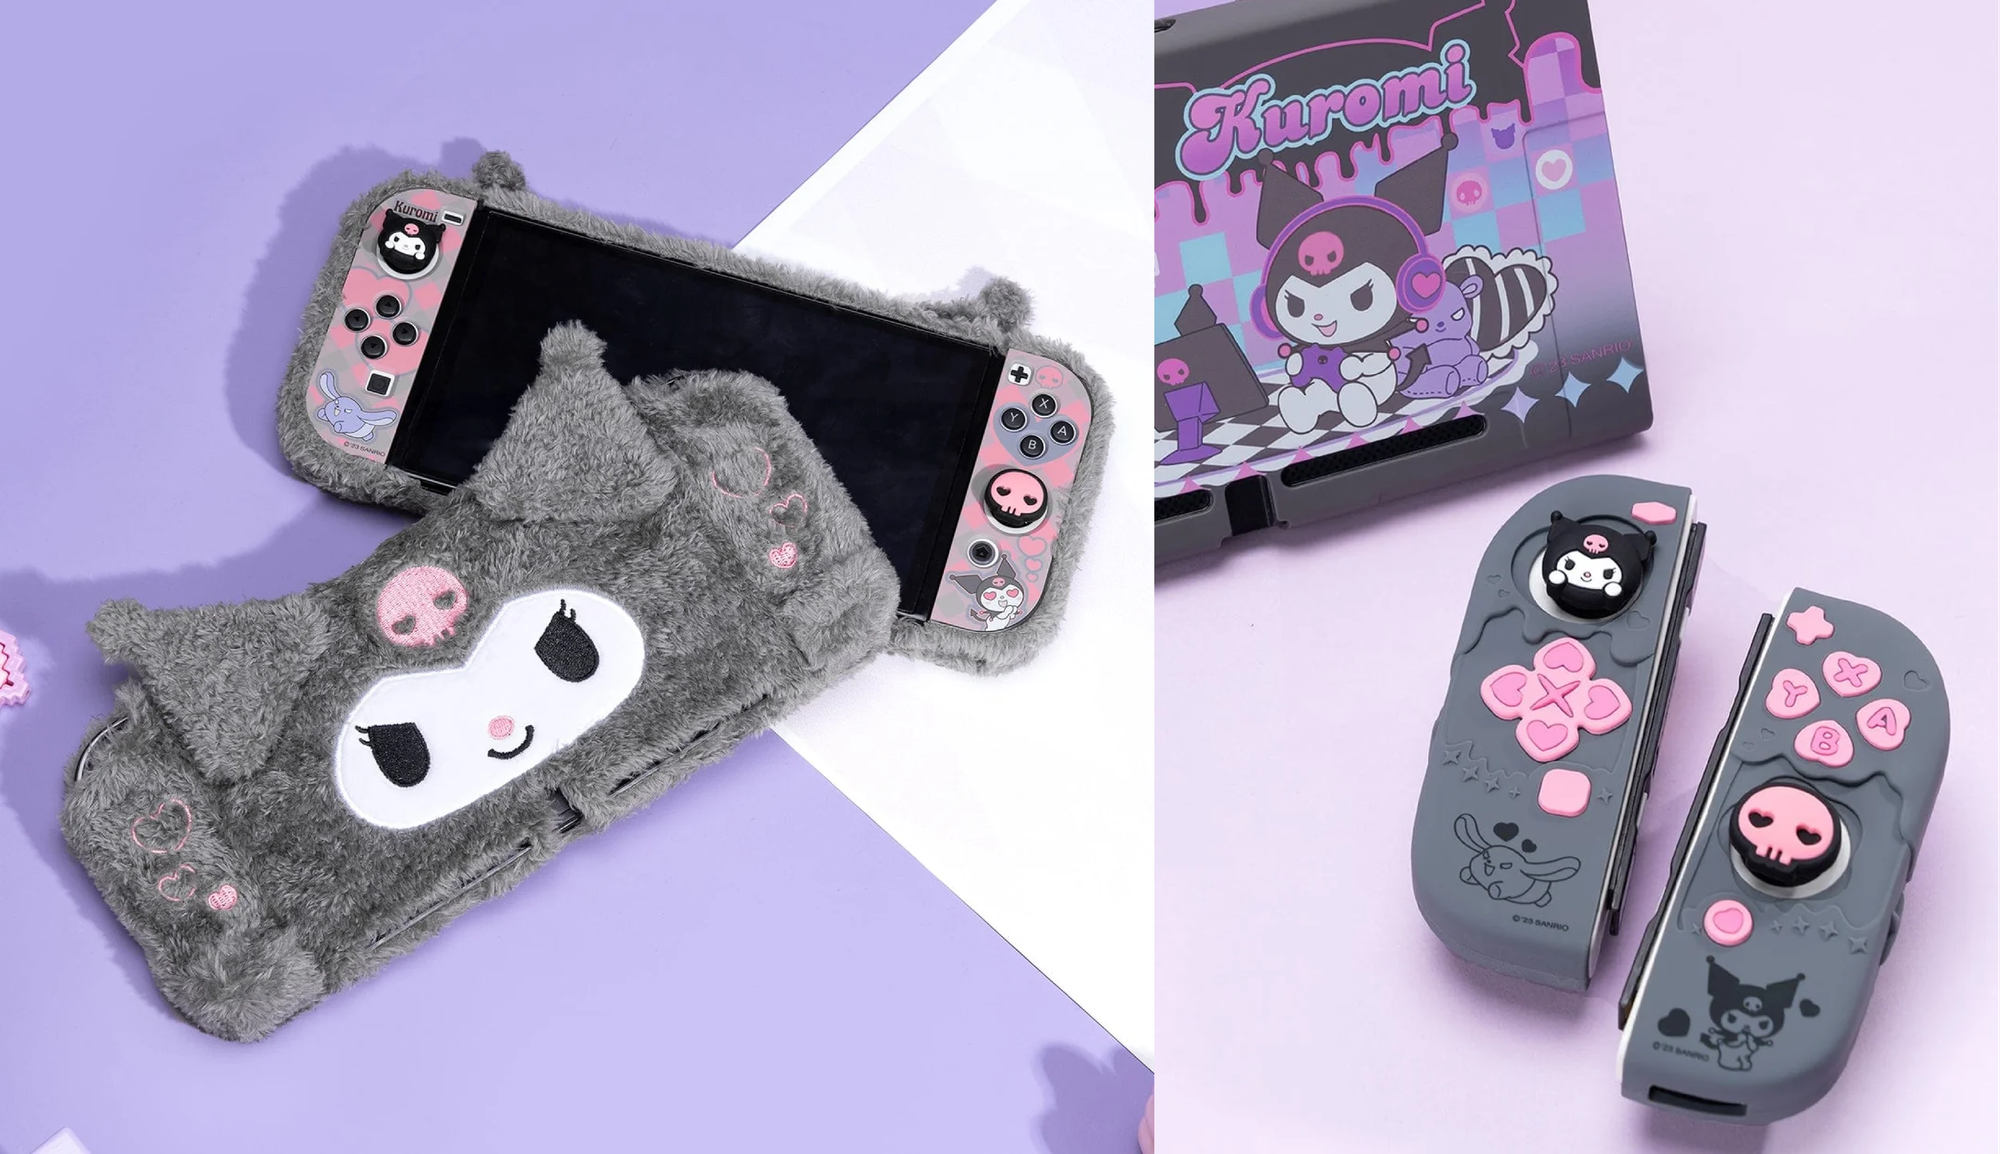 Geekshare’s Sanrio Collab Collection is now available in the US, and features a lot of Kuromi